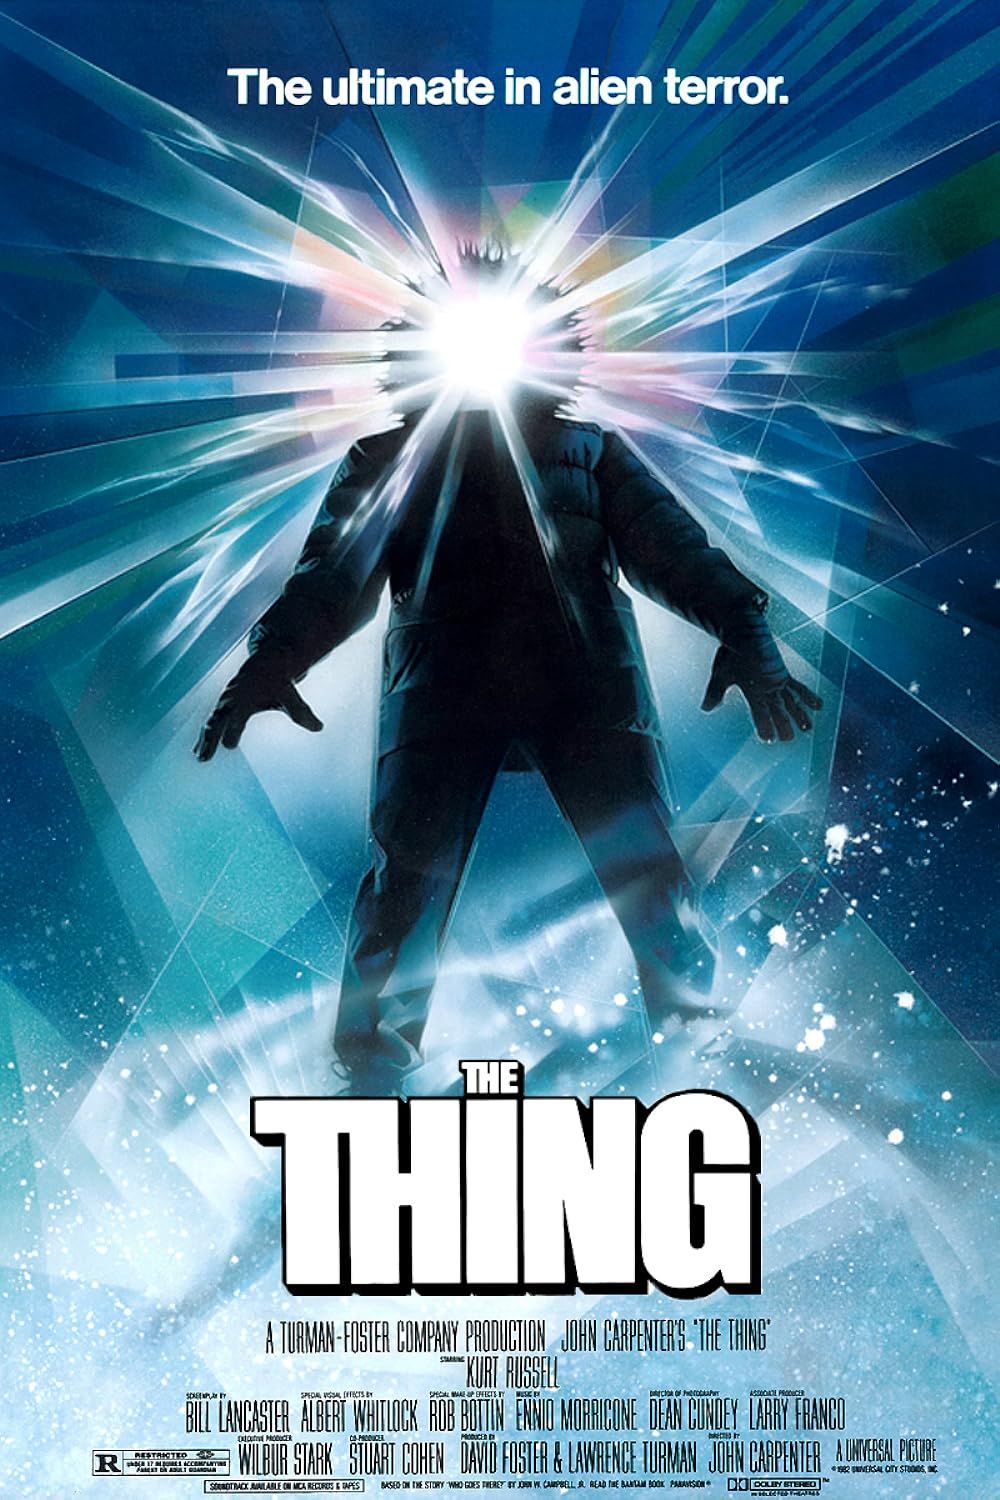 A Bundled Up Figure with Light Coming from Their Hood in The Thing 1982 Poster